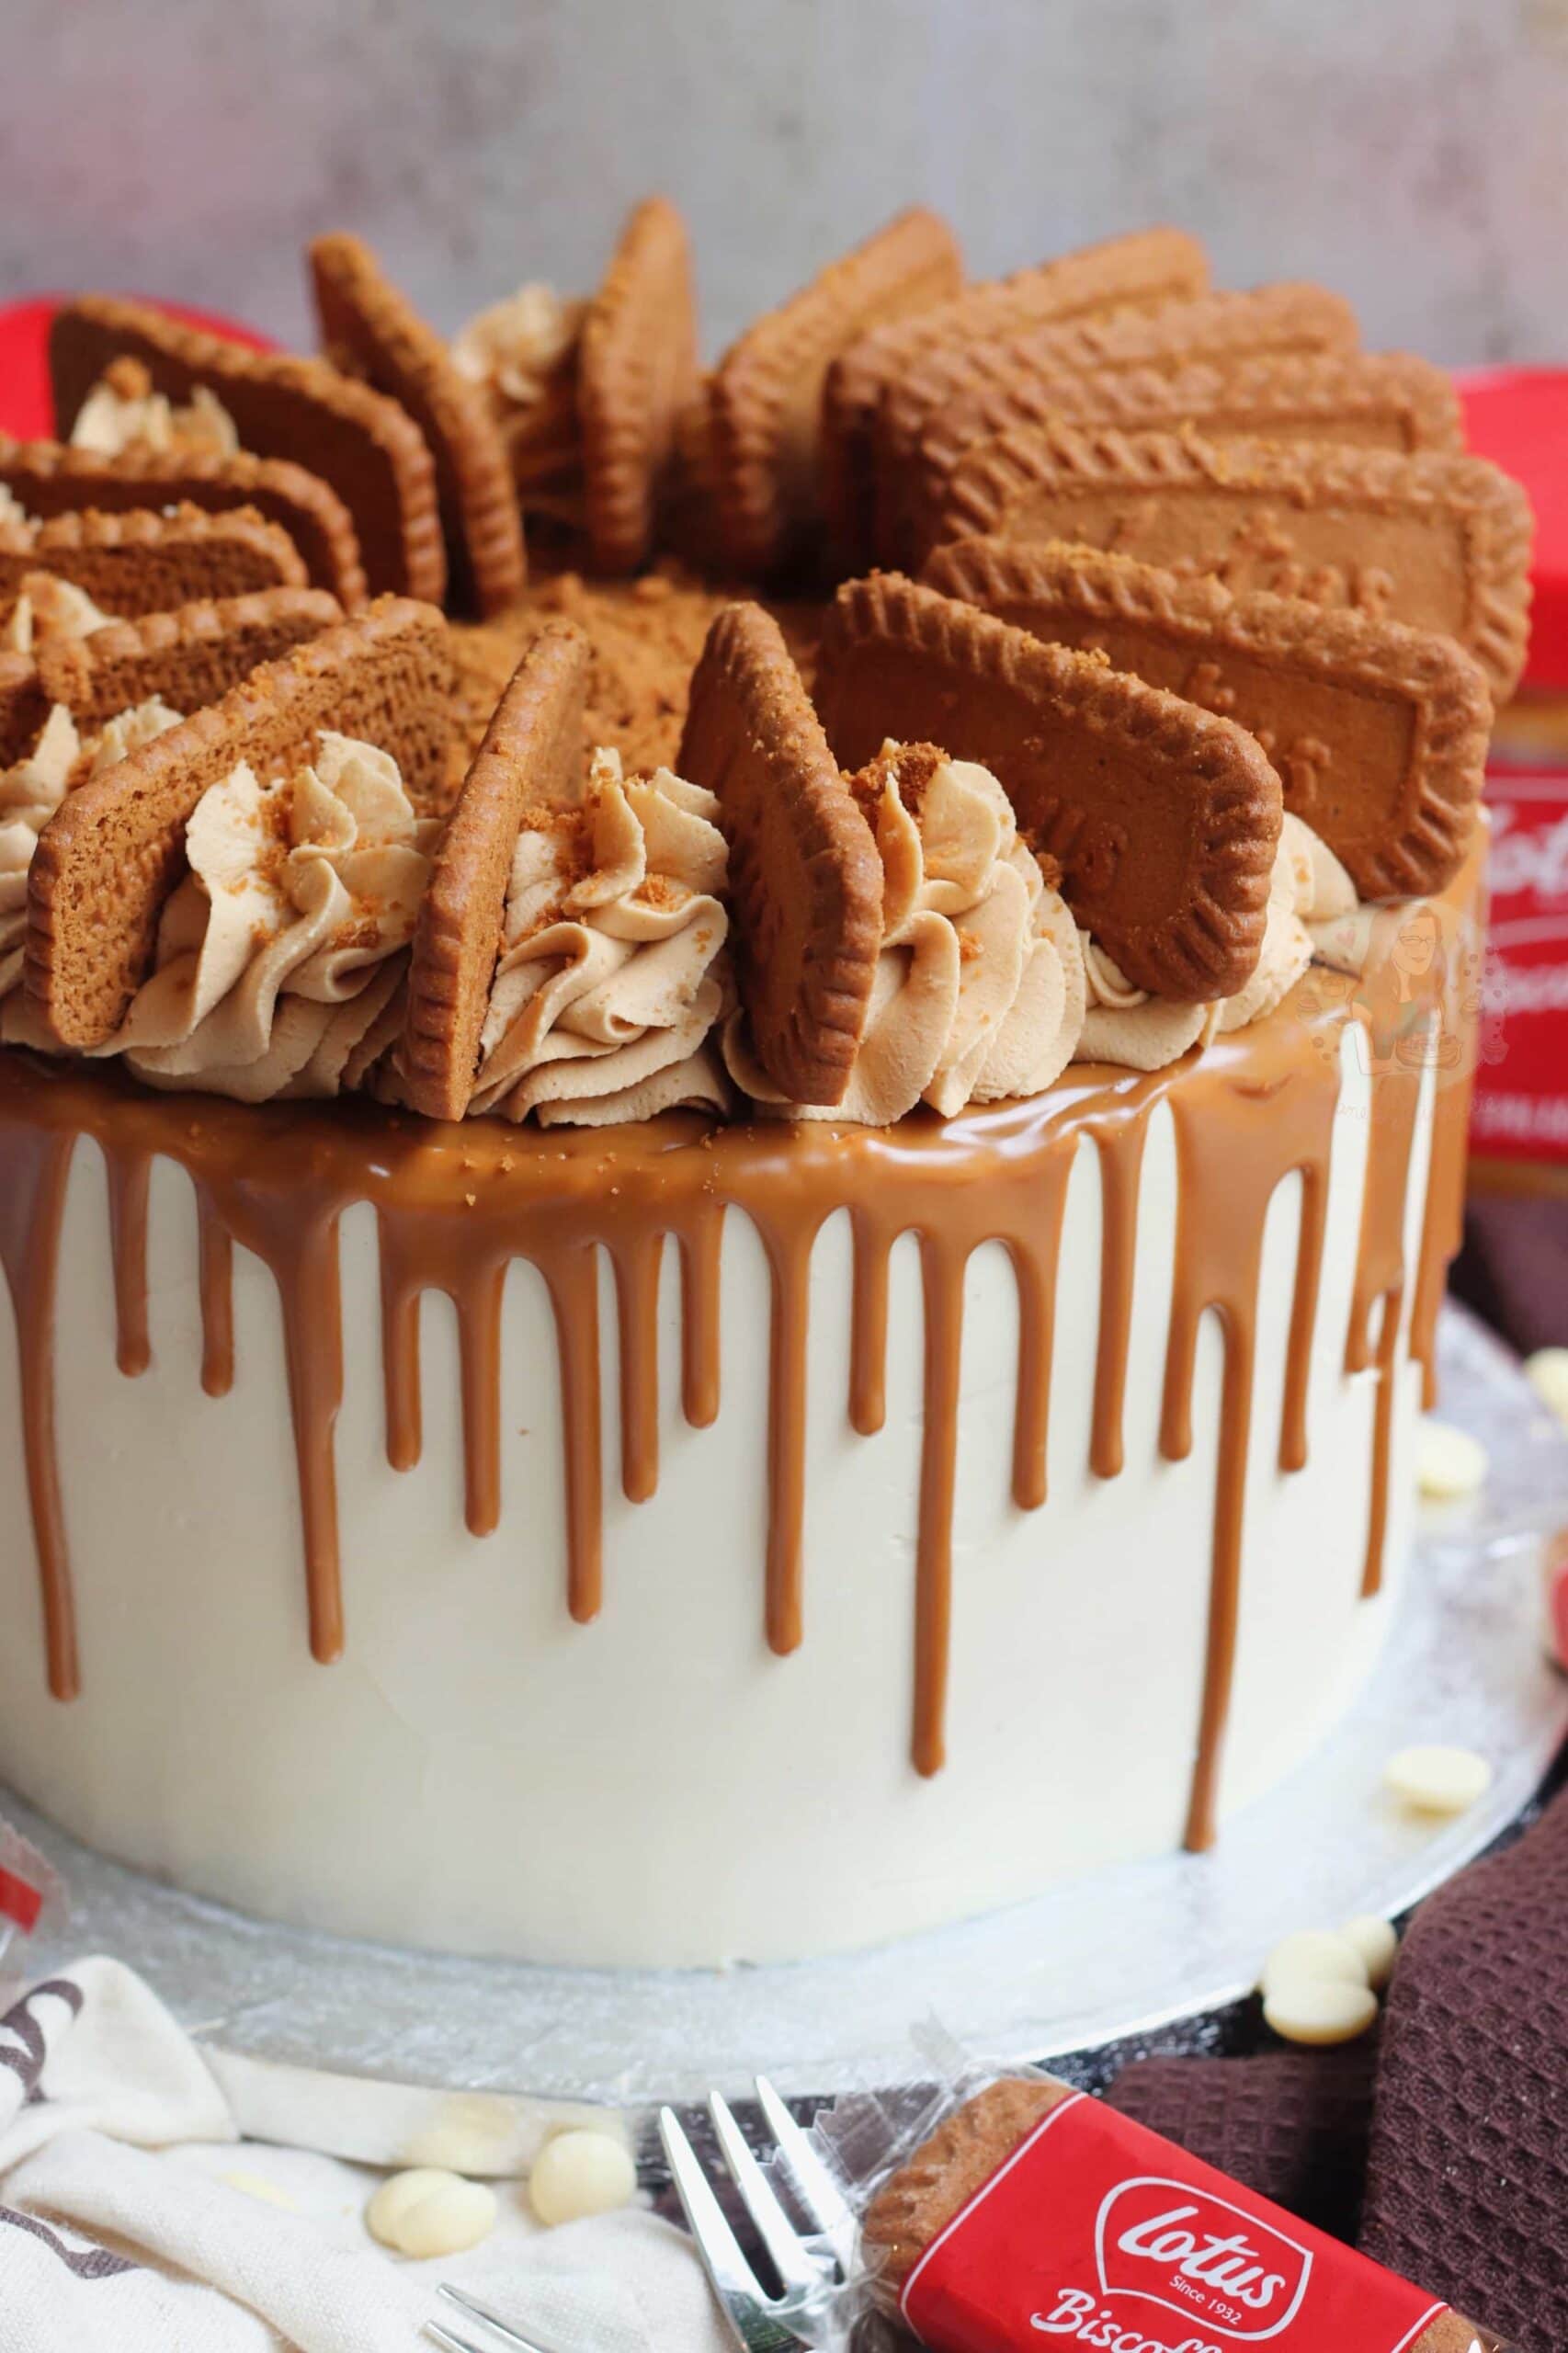 Lotus Biscoff Cake - The Salted Sweets